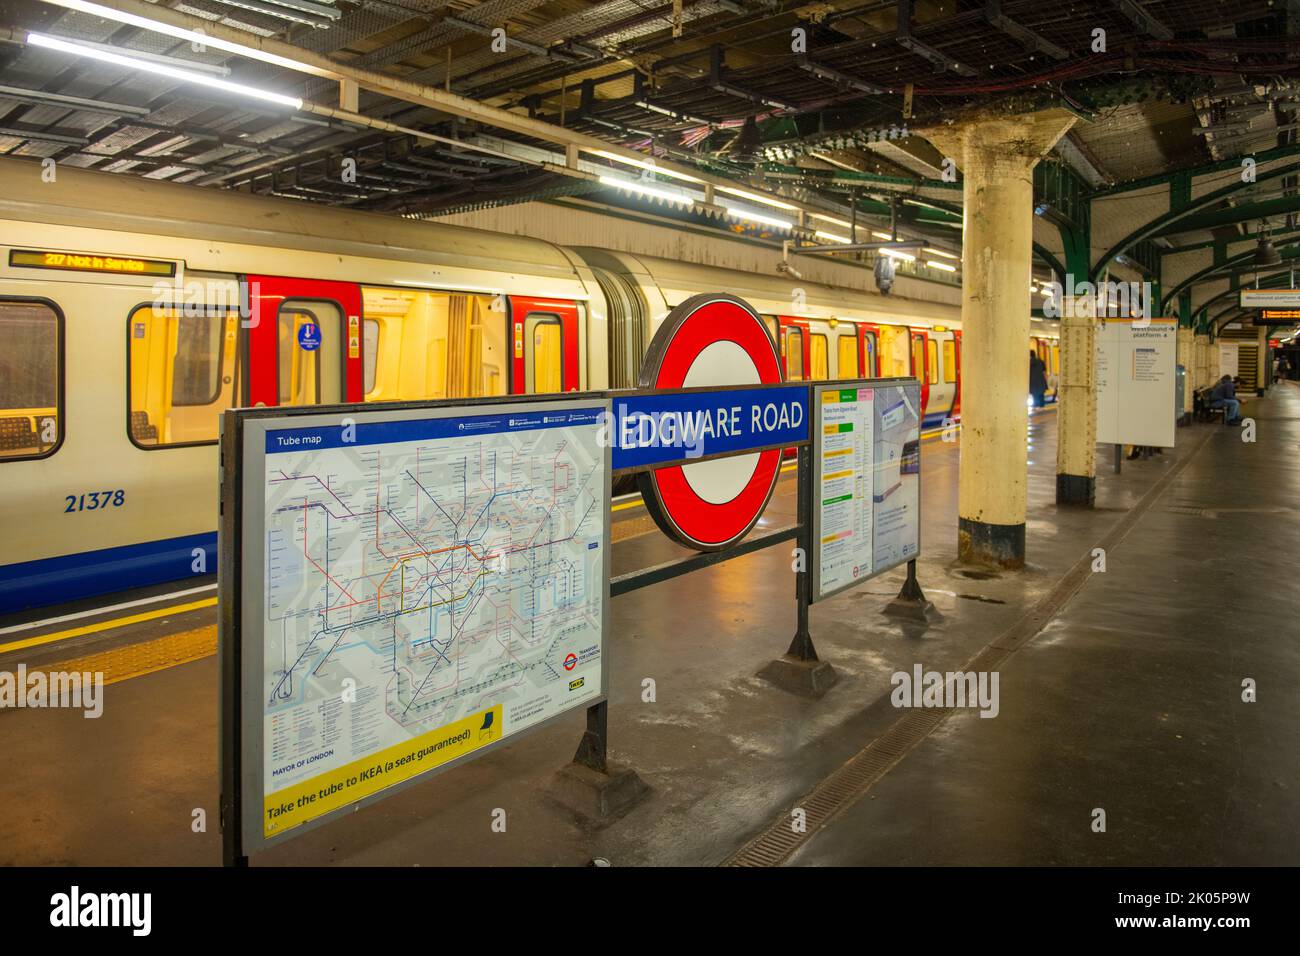 Circle Line platform at Edgware Road in city of Westminster in London, England, UK. Stock Photo